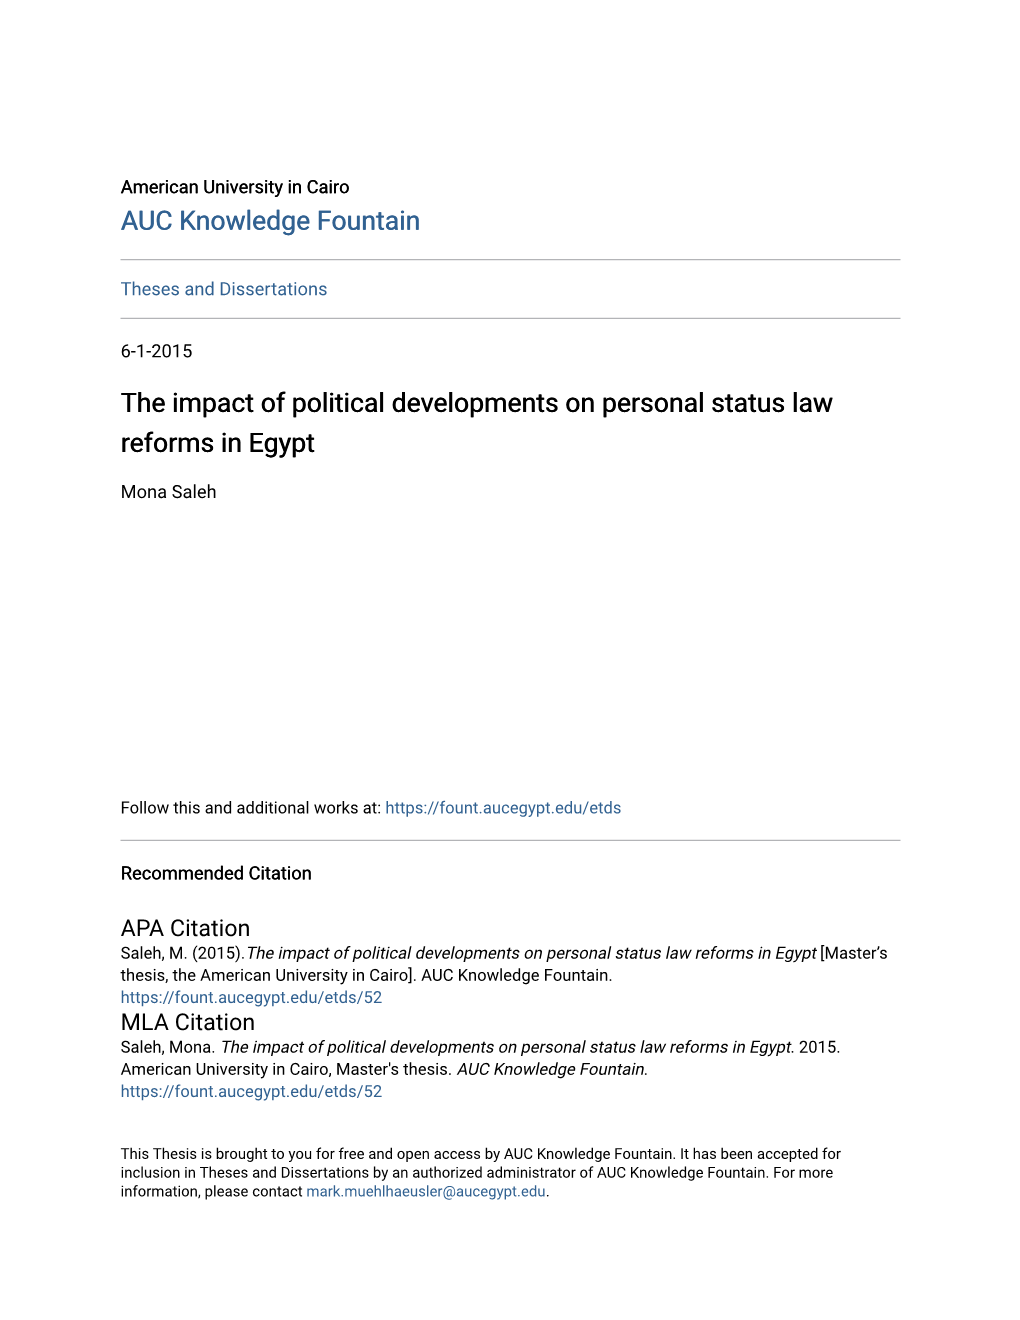 The Impact of Political Developments on Personal Status Law Reforms in Egypt